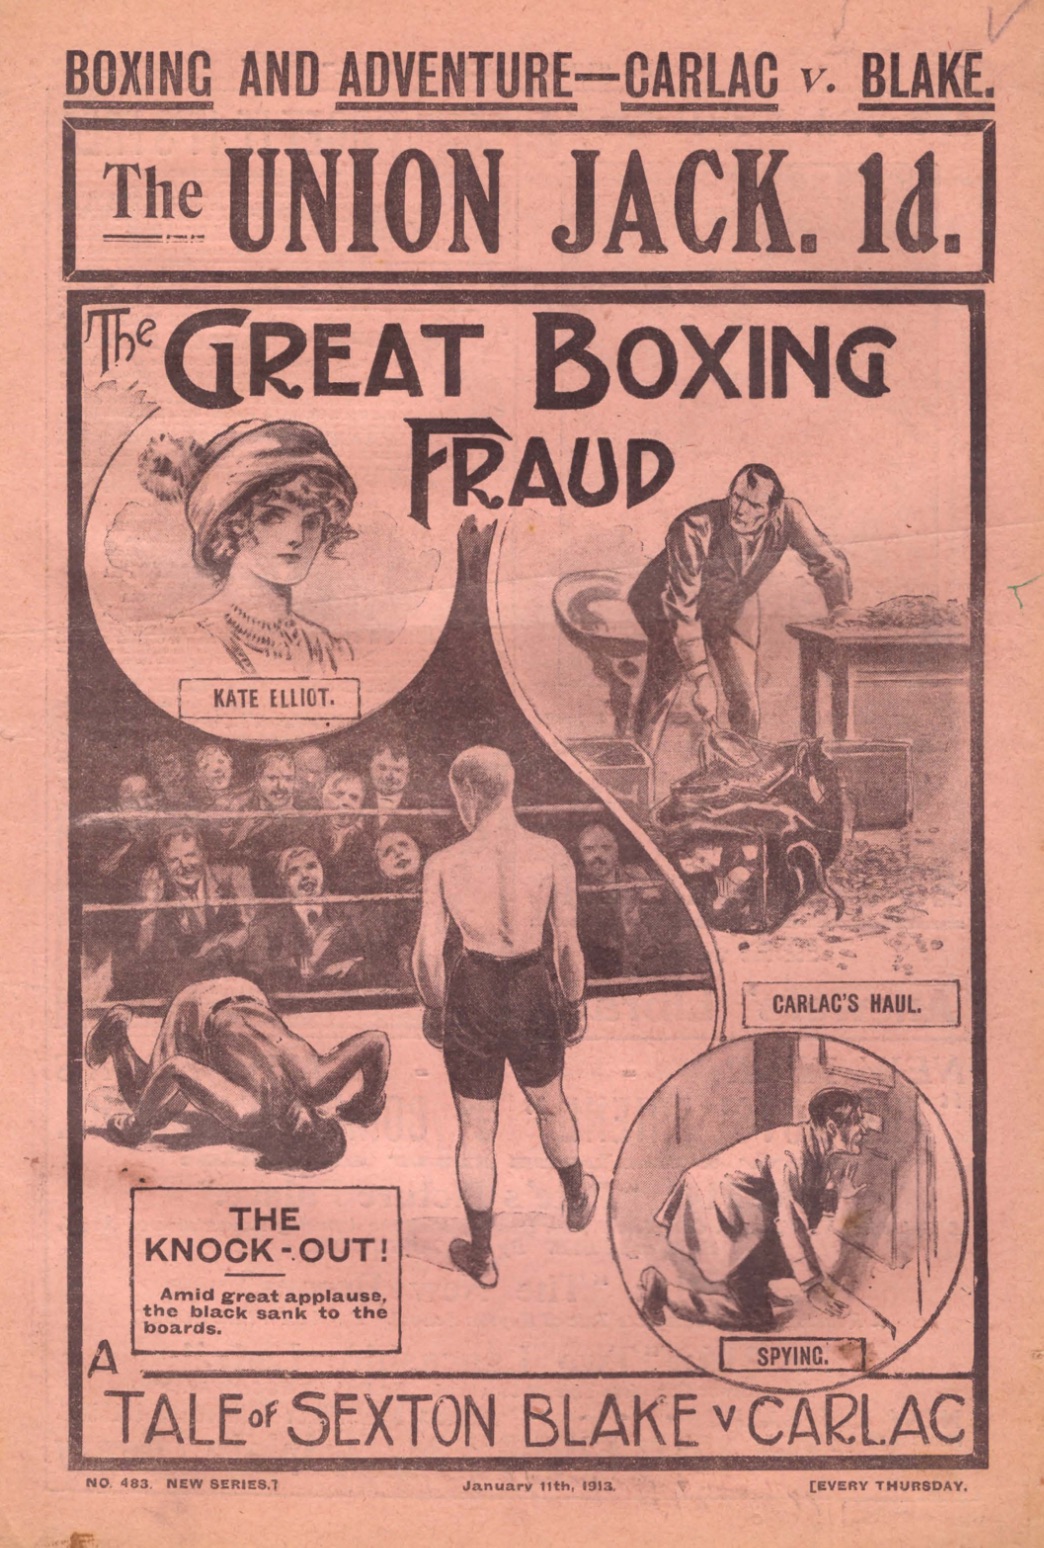 THE GREAT BOXING FRAUD